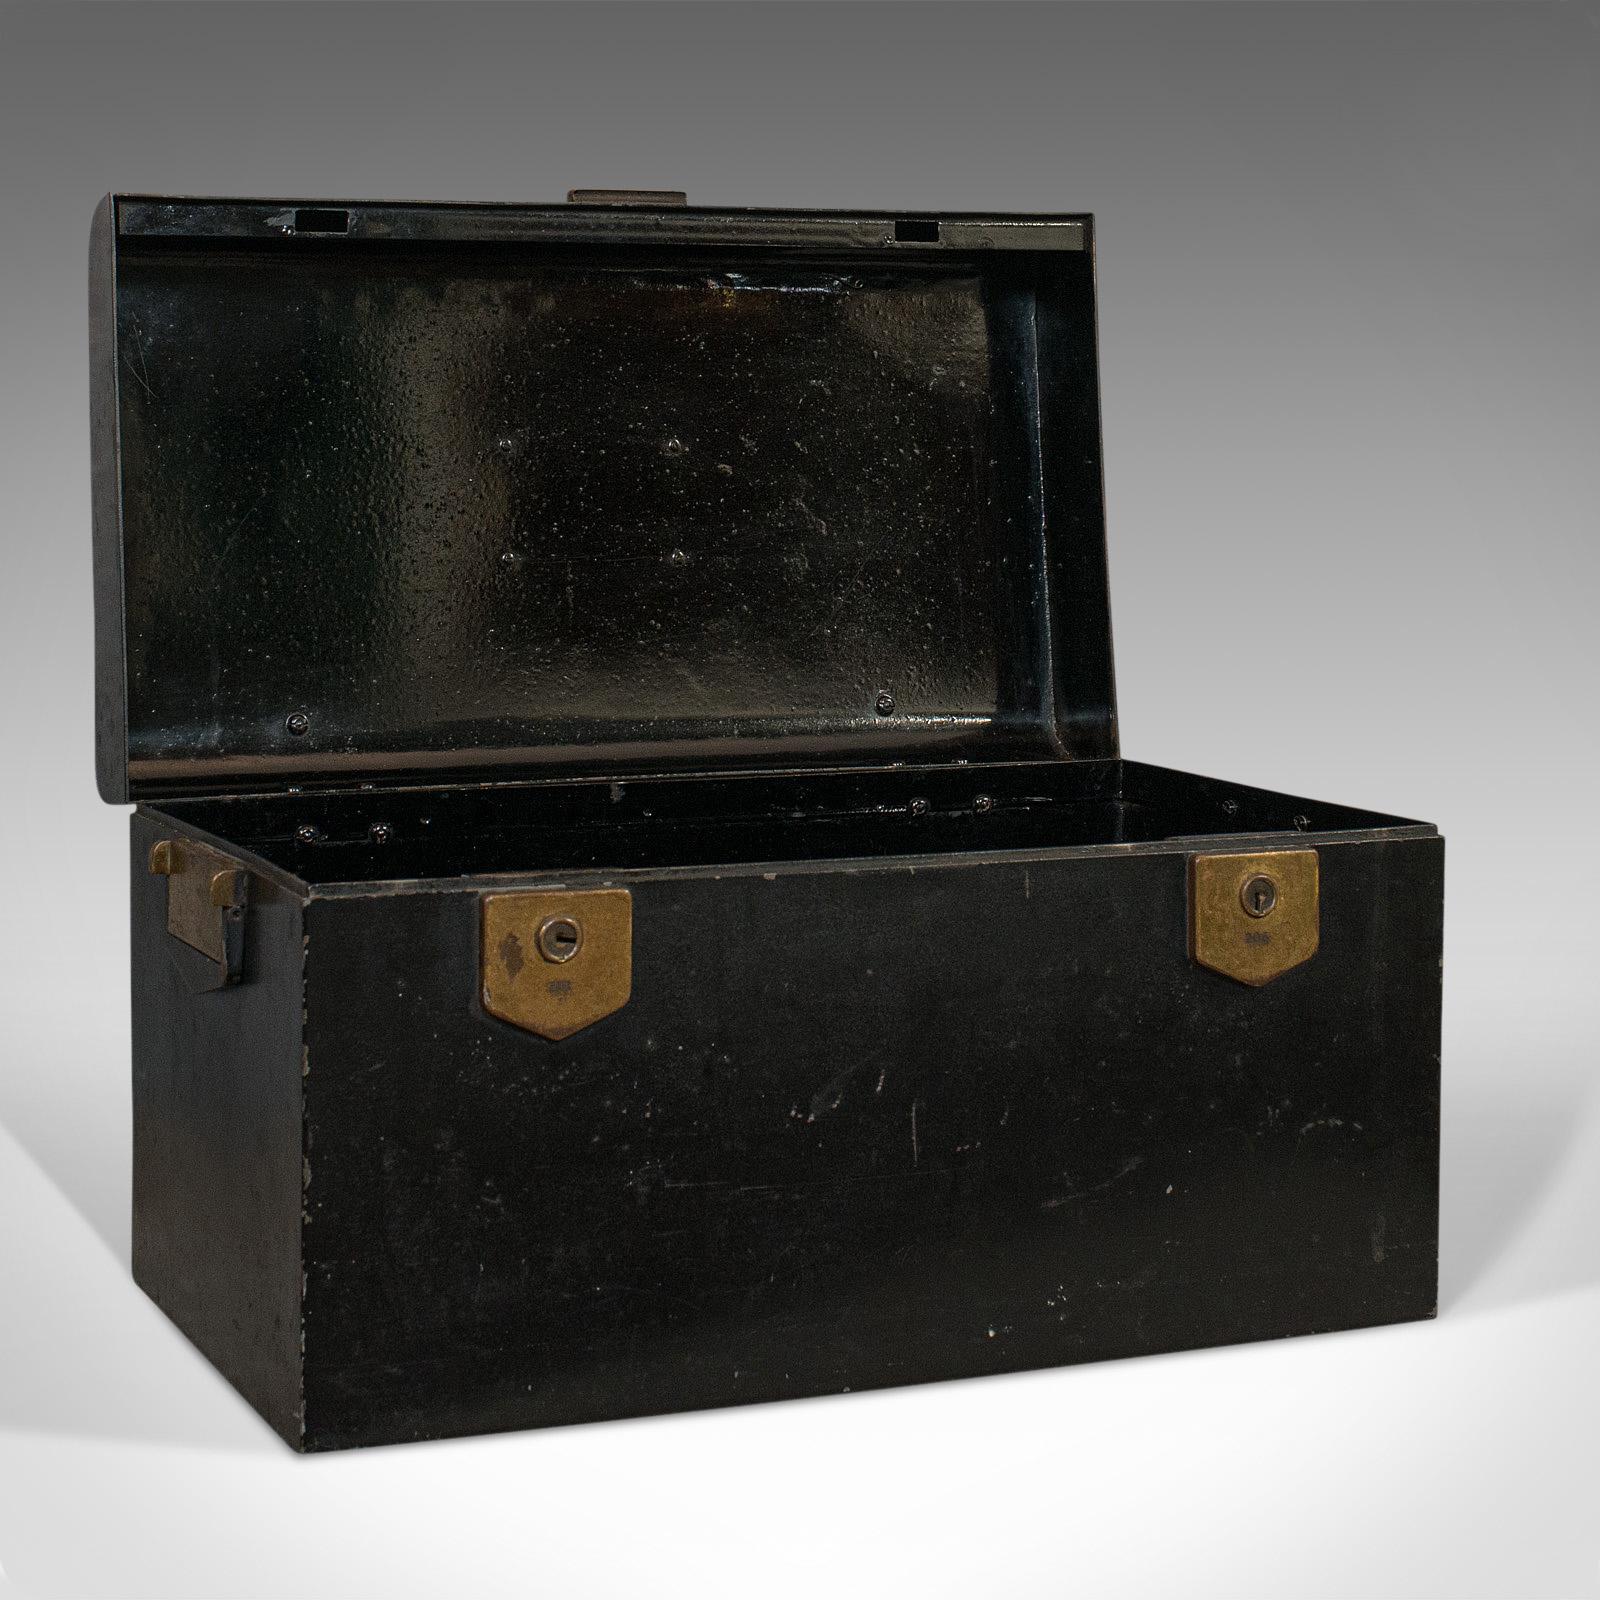 This is a vintage deed box. An English, Art Deco iron document or deposit chest, dating to the early 20th century, circa 1930.

Displays a desirable aged patina
Painted black finish over iron shows weathering commensurate with age
Bronze